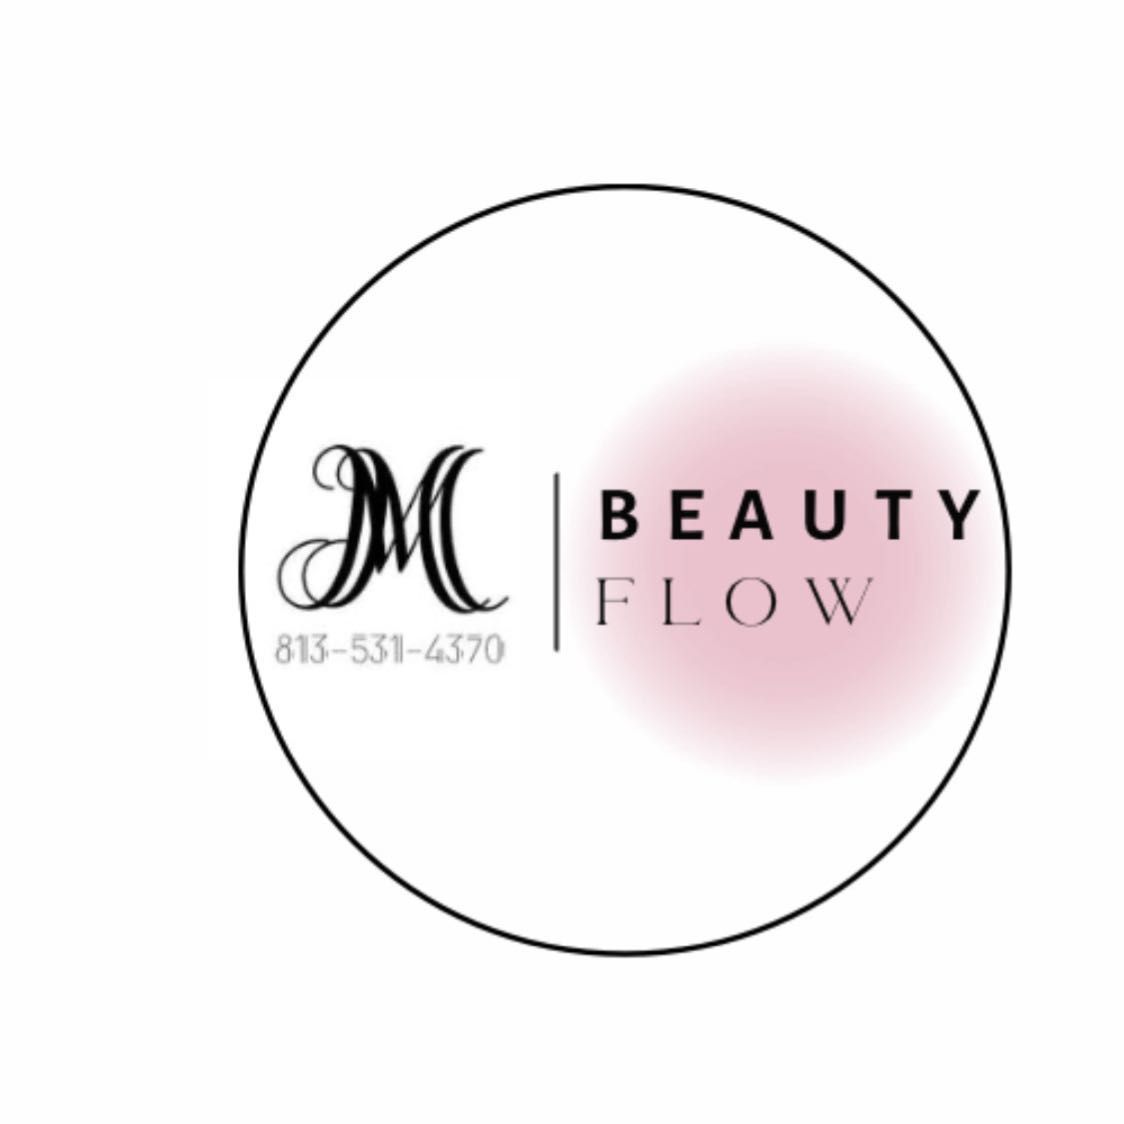 Monica's Beauty Flow, 2807 Clifford Sample Dr, Tampa, 33619